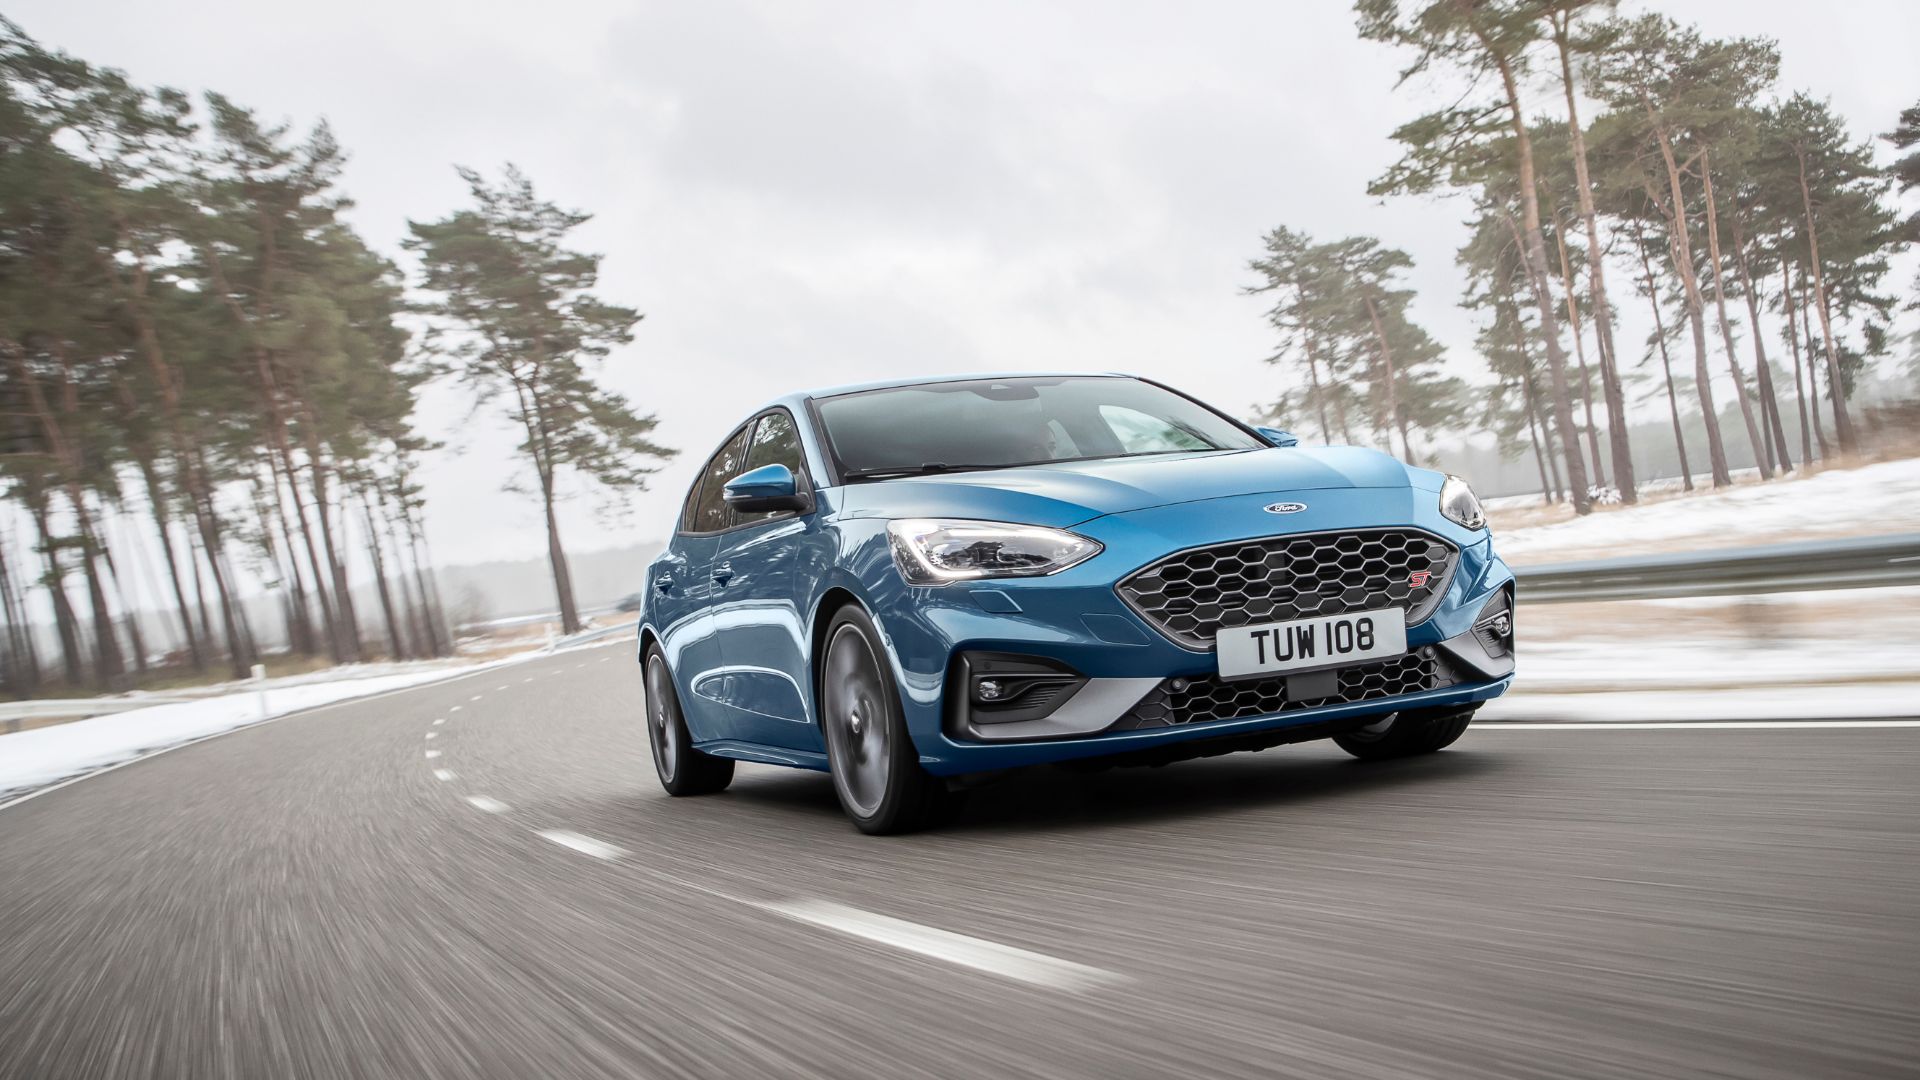 New Ford Focus St Pictures And Wallpaper Gallery Motor Illustrated